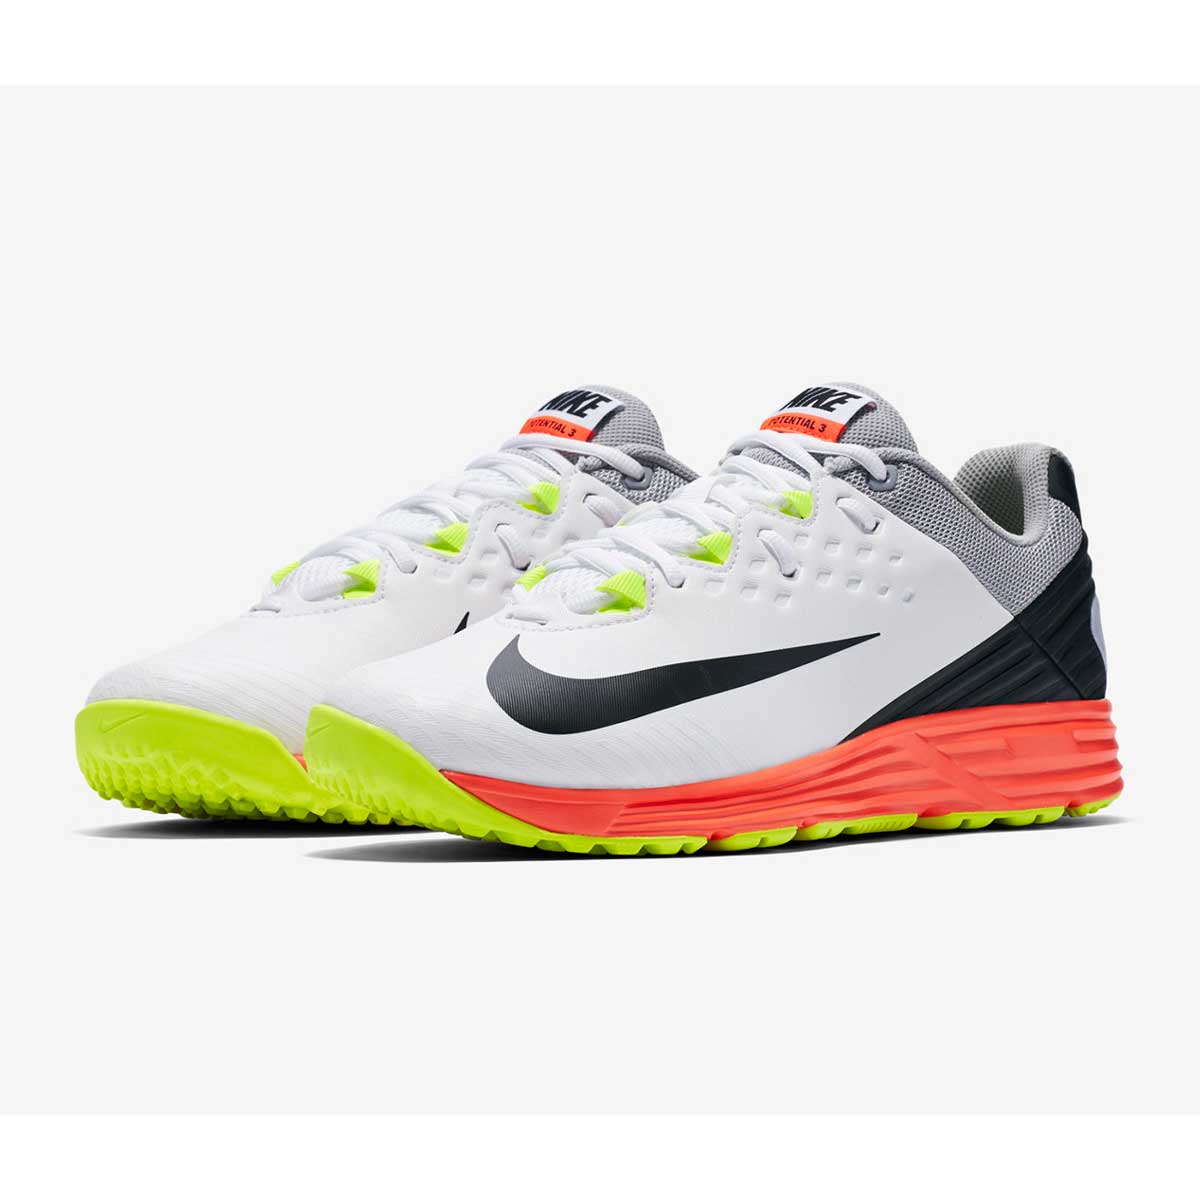 Buy Nike Potential 3 Cricket Shoes Online India| Nike Cricket Shoes